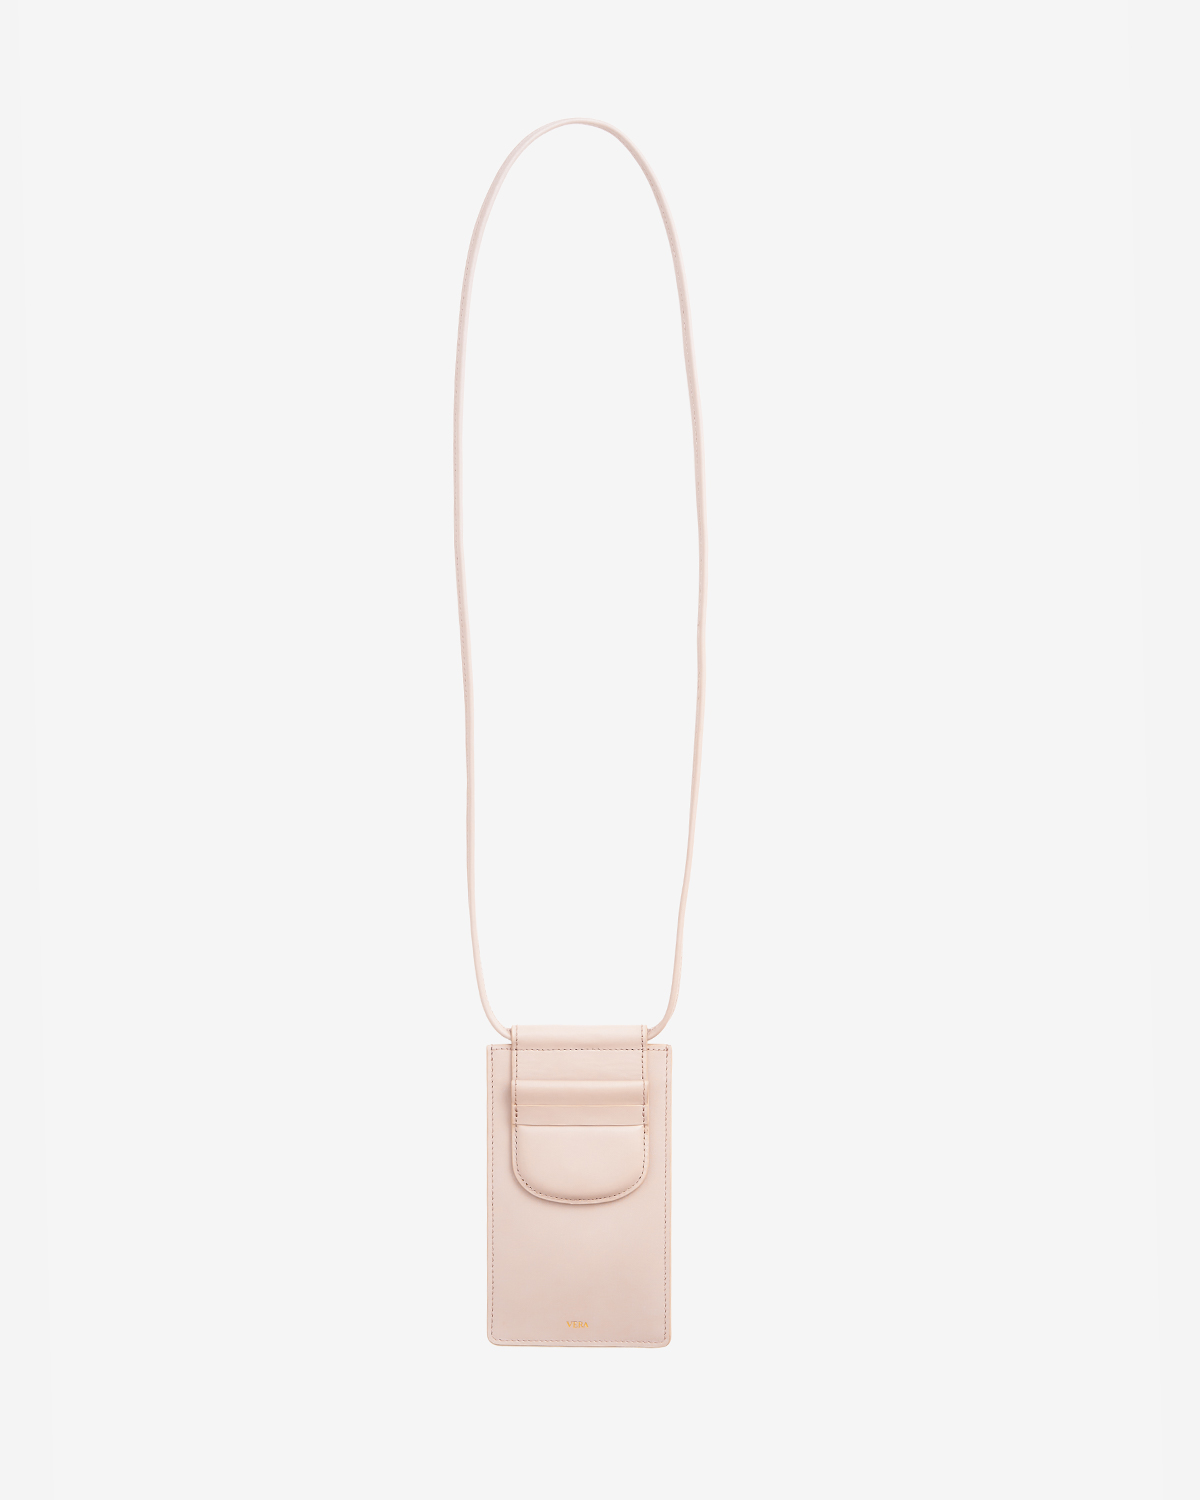 VERA Best Millie Pouch in Barely Nude